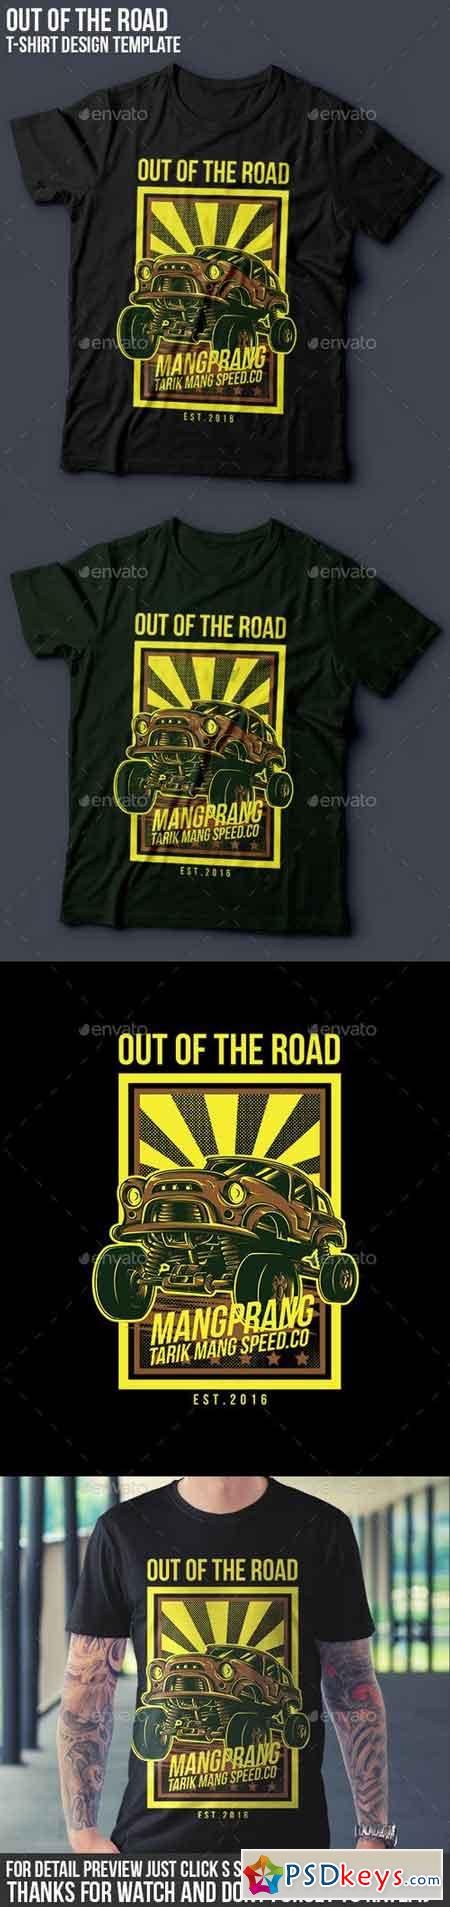 Out of the Road T-Shirt Design 14869161